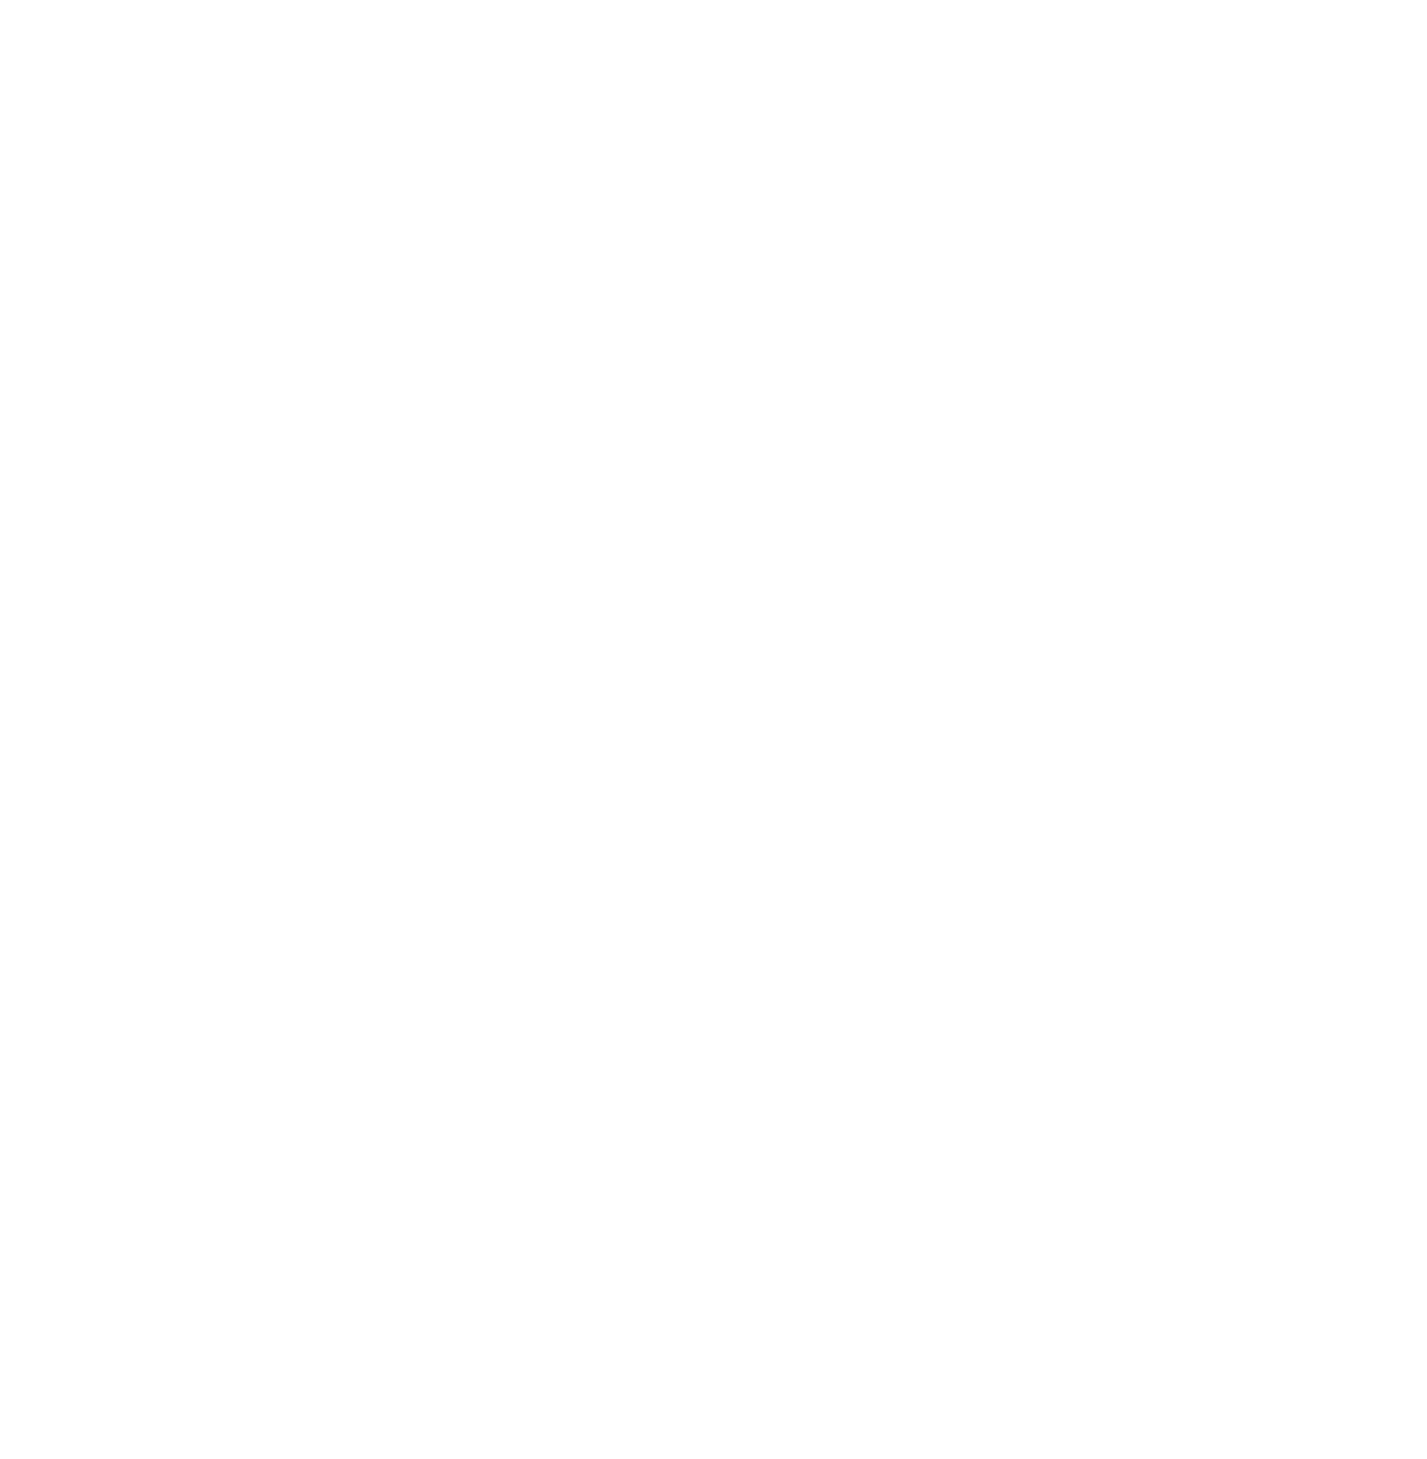 Oxford Capital Limited